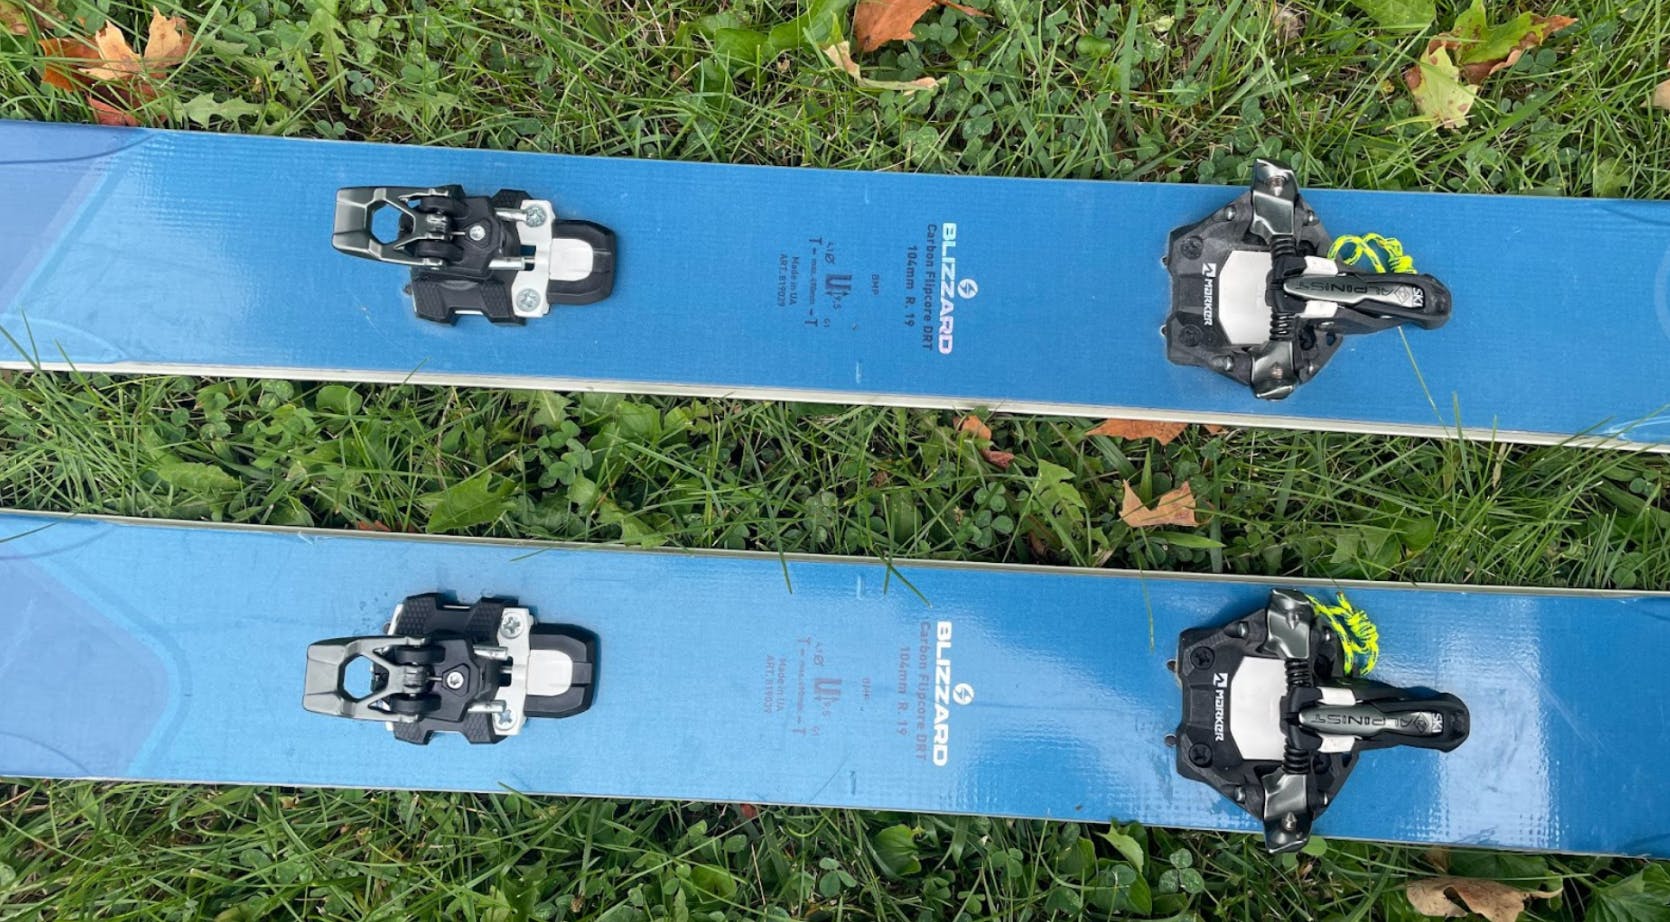 Top down view of the Marker Alpinist 12 Ski Bindings on skis. 